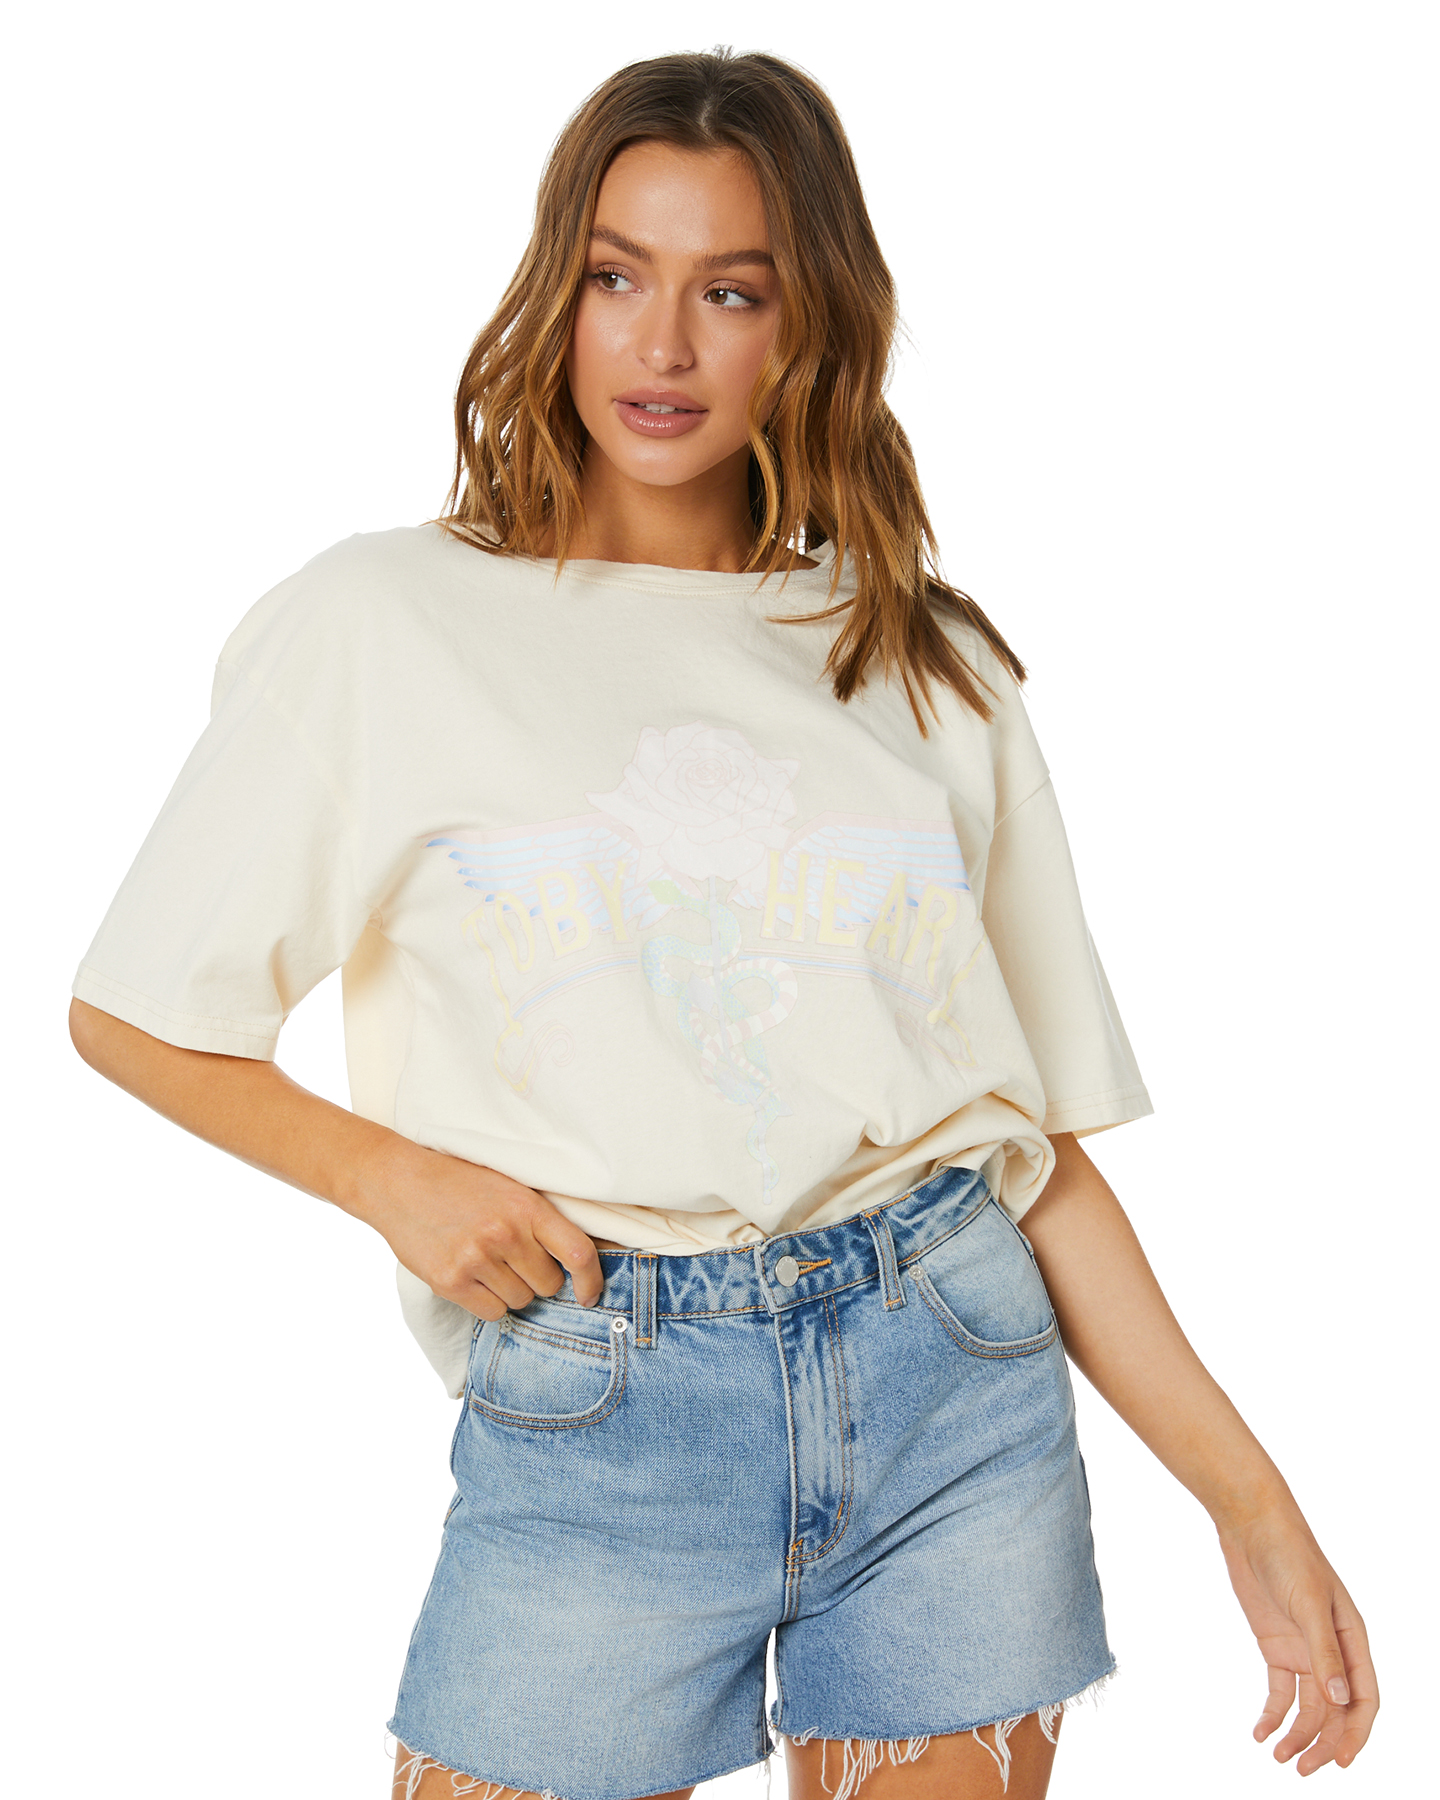 Toby Heart Ginger Toby Tee - Cream | SurfStitch